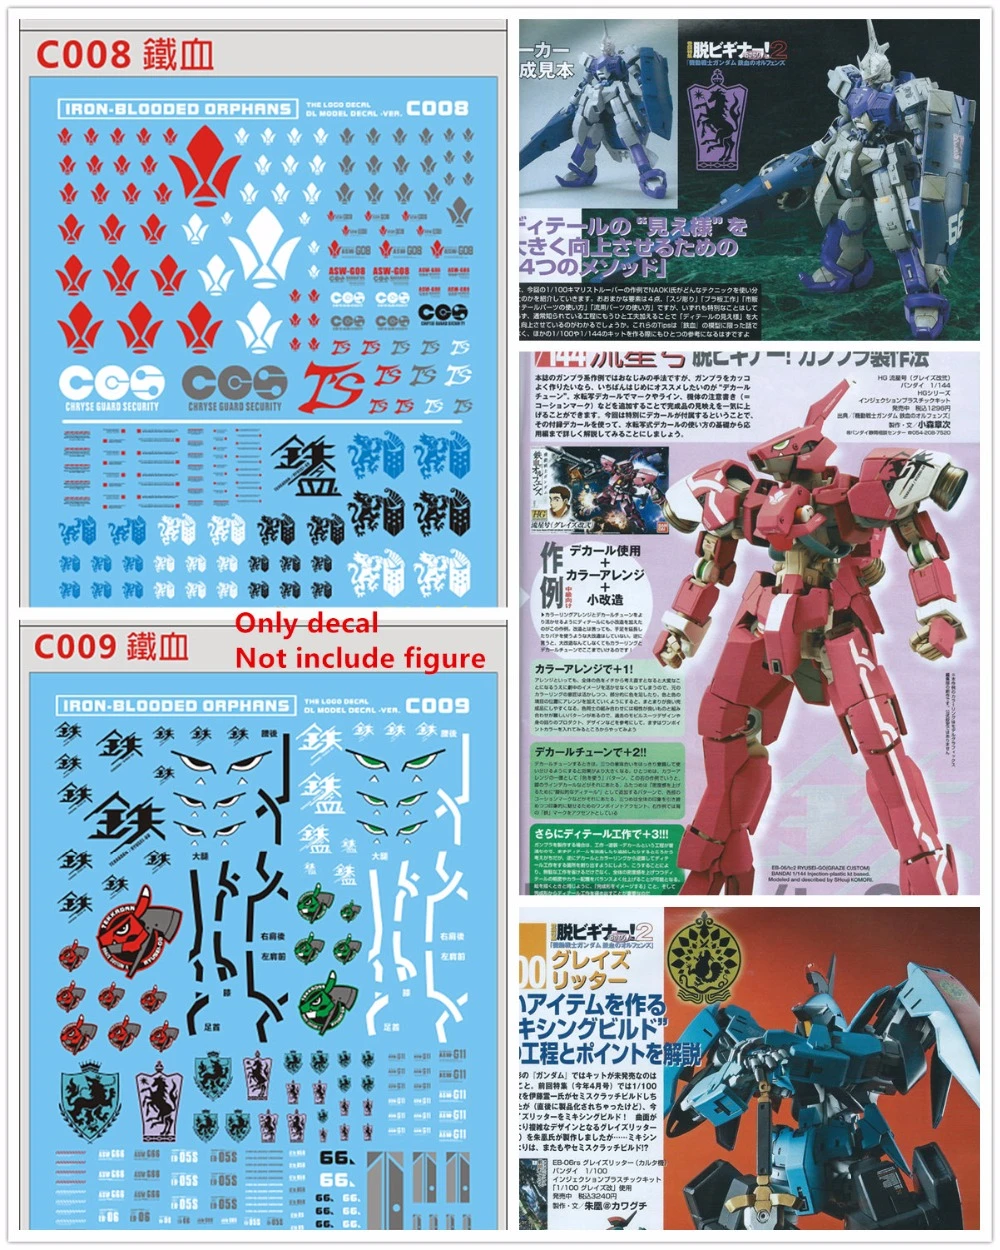 D.l High Quality Decal Water Paste for Bandai MG 1/100 Sandrock EW PB Gundam for sale online